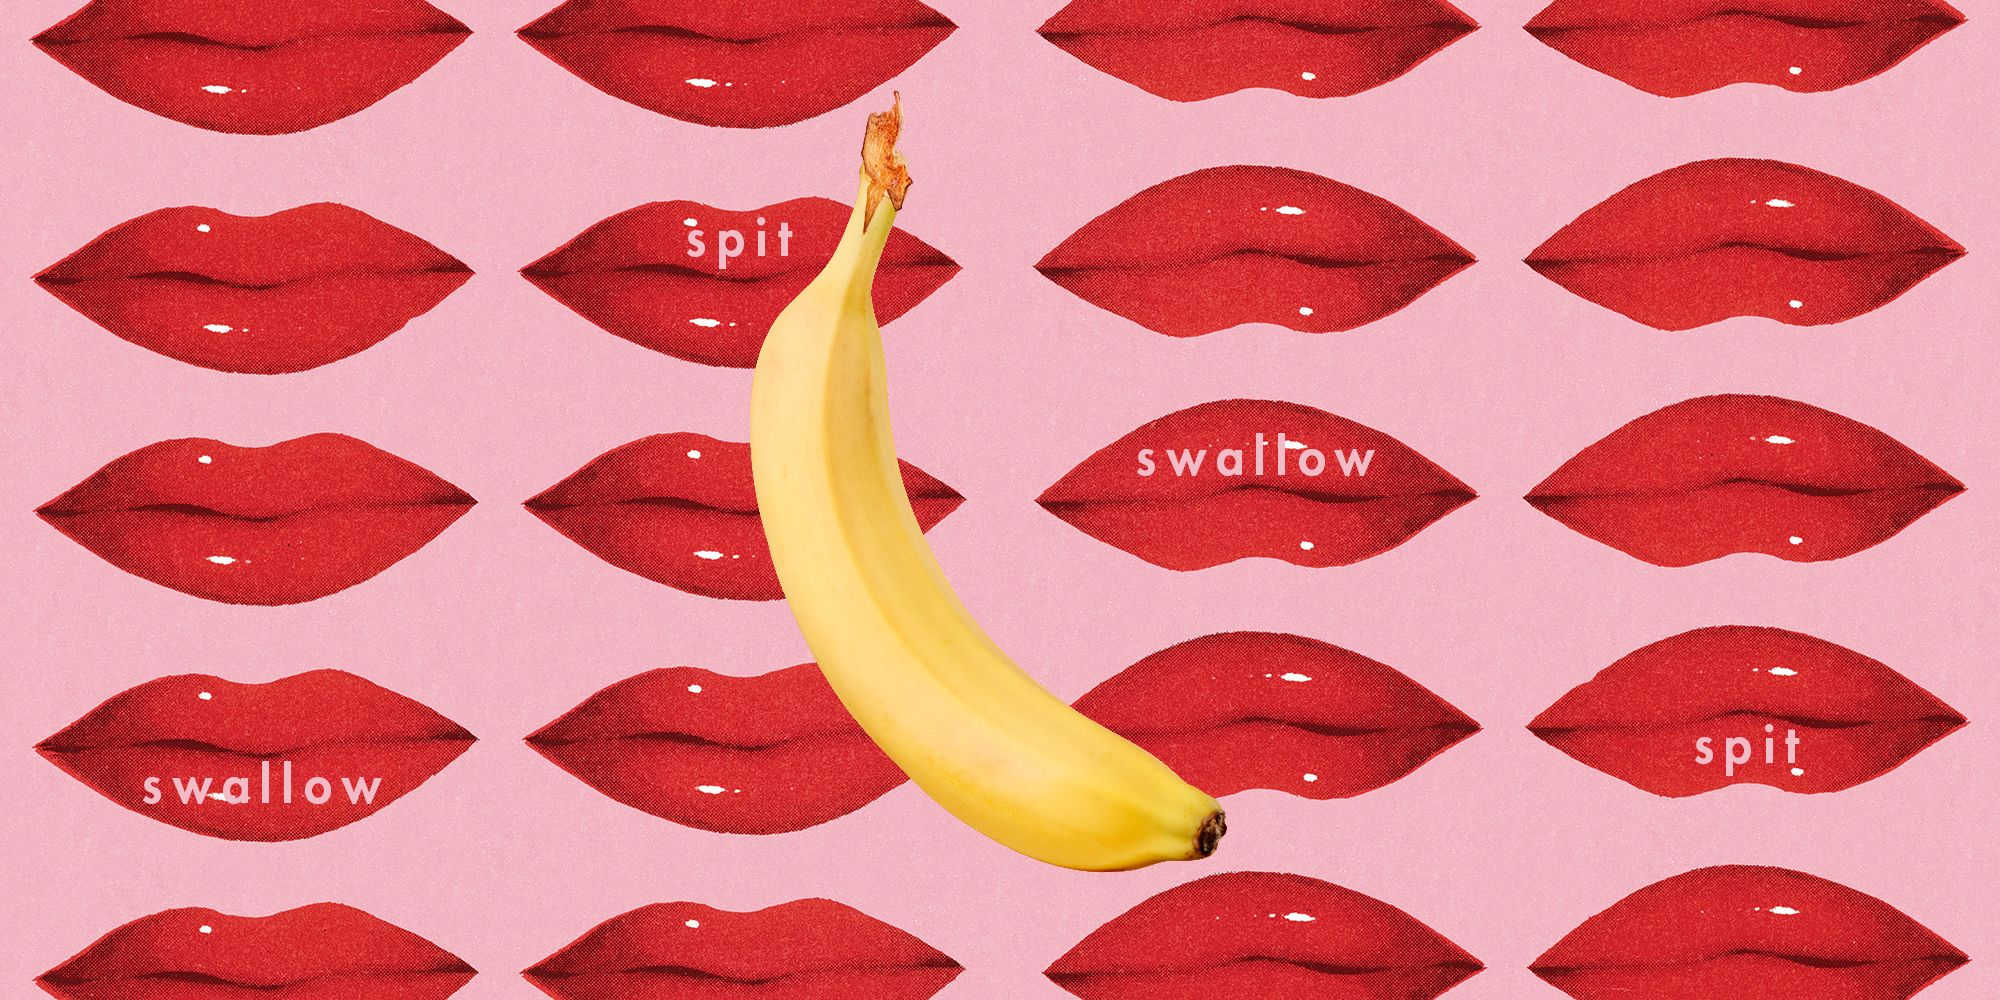 Spit or Swallow image